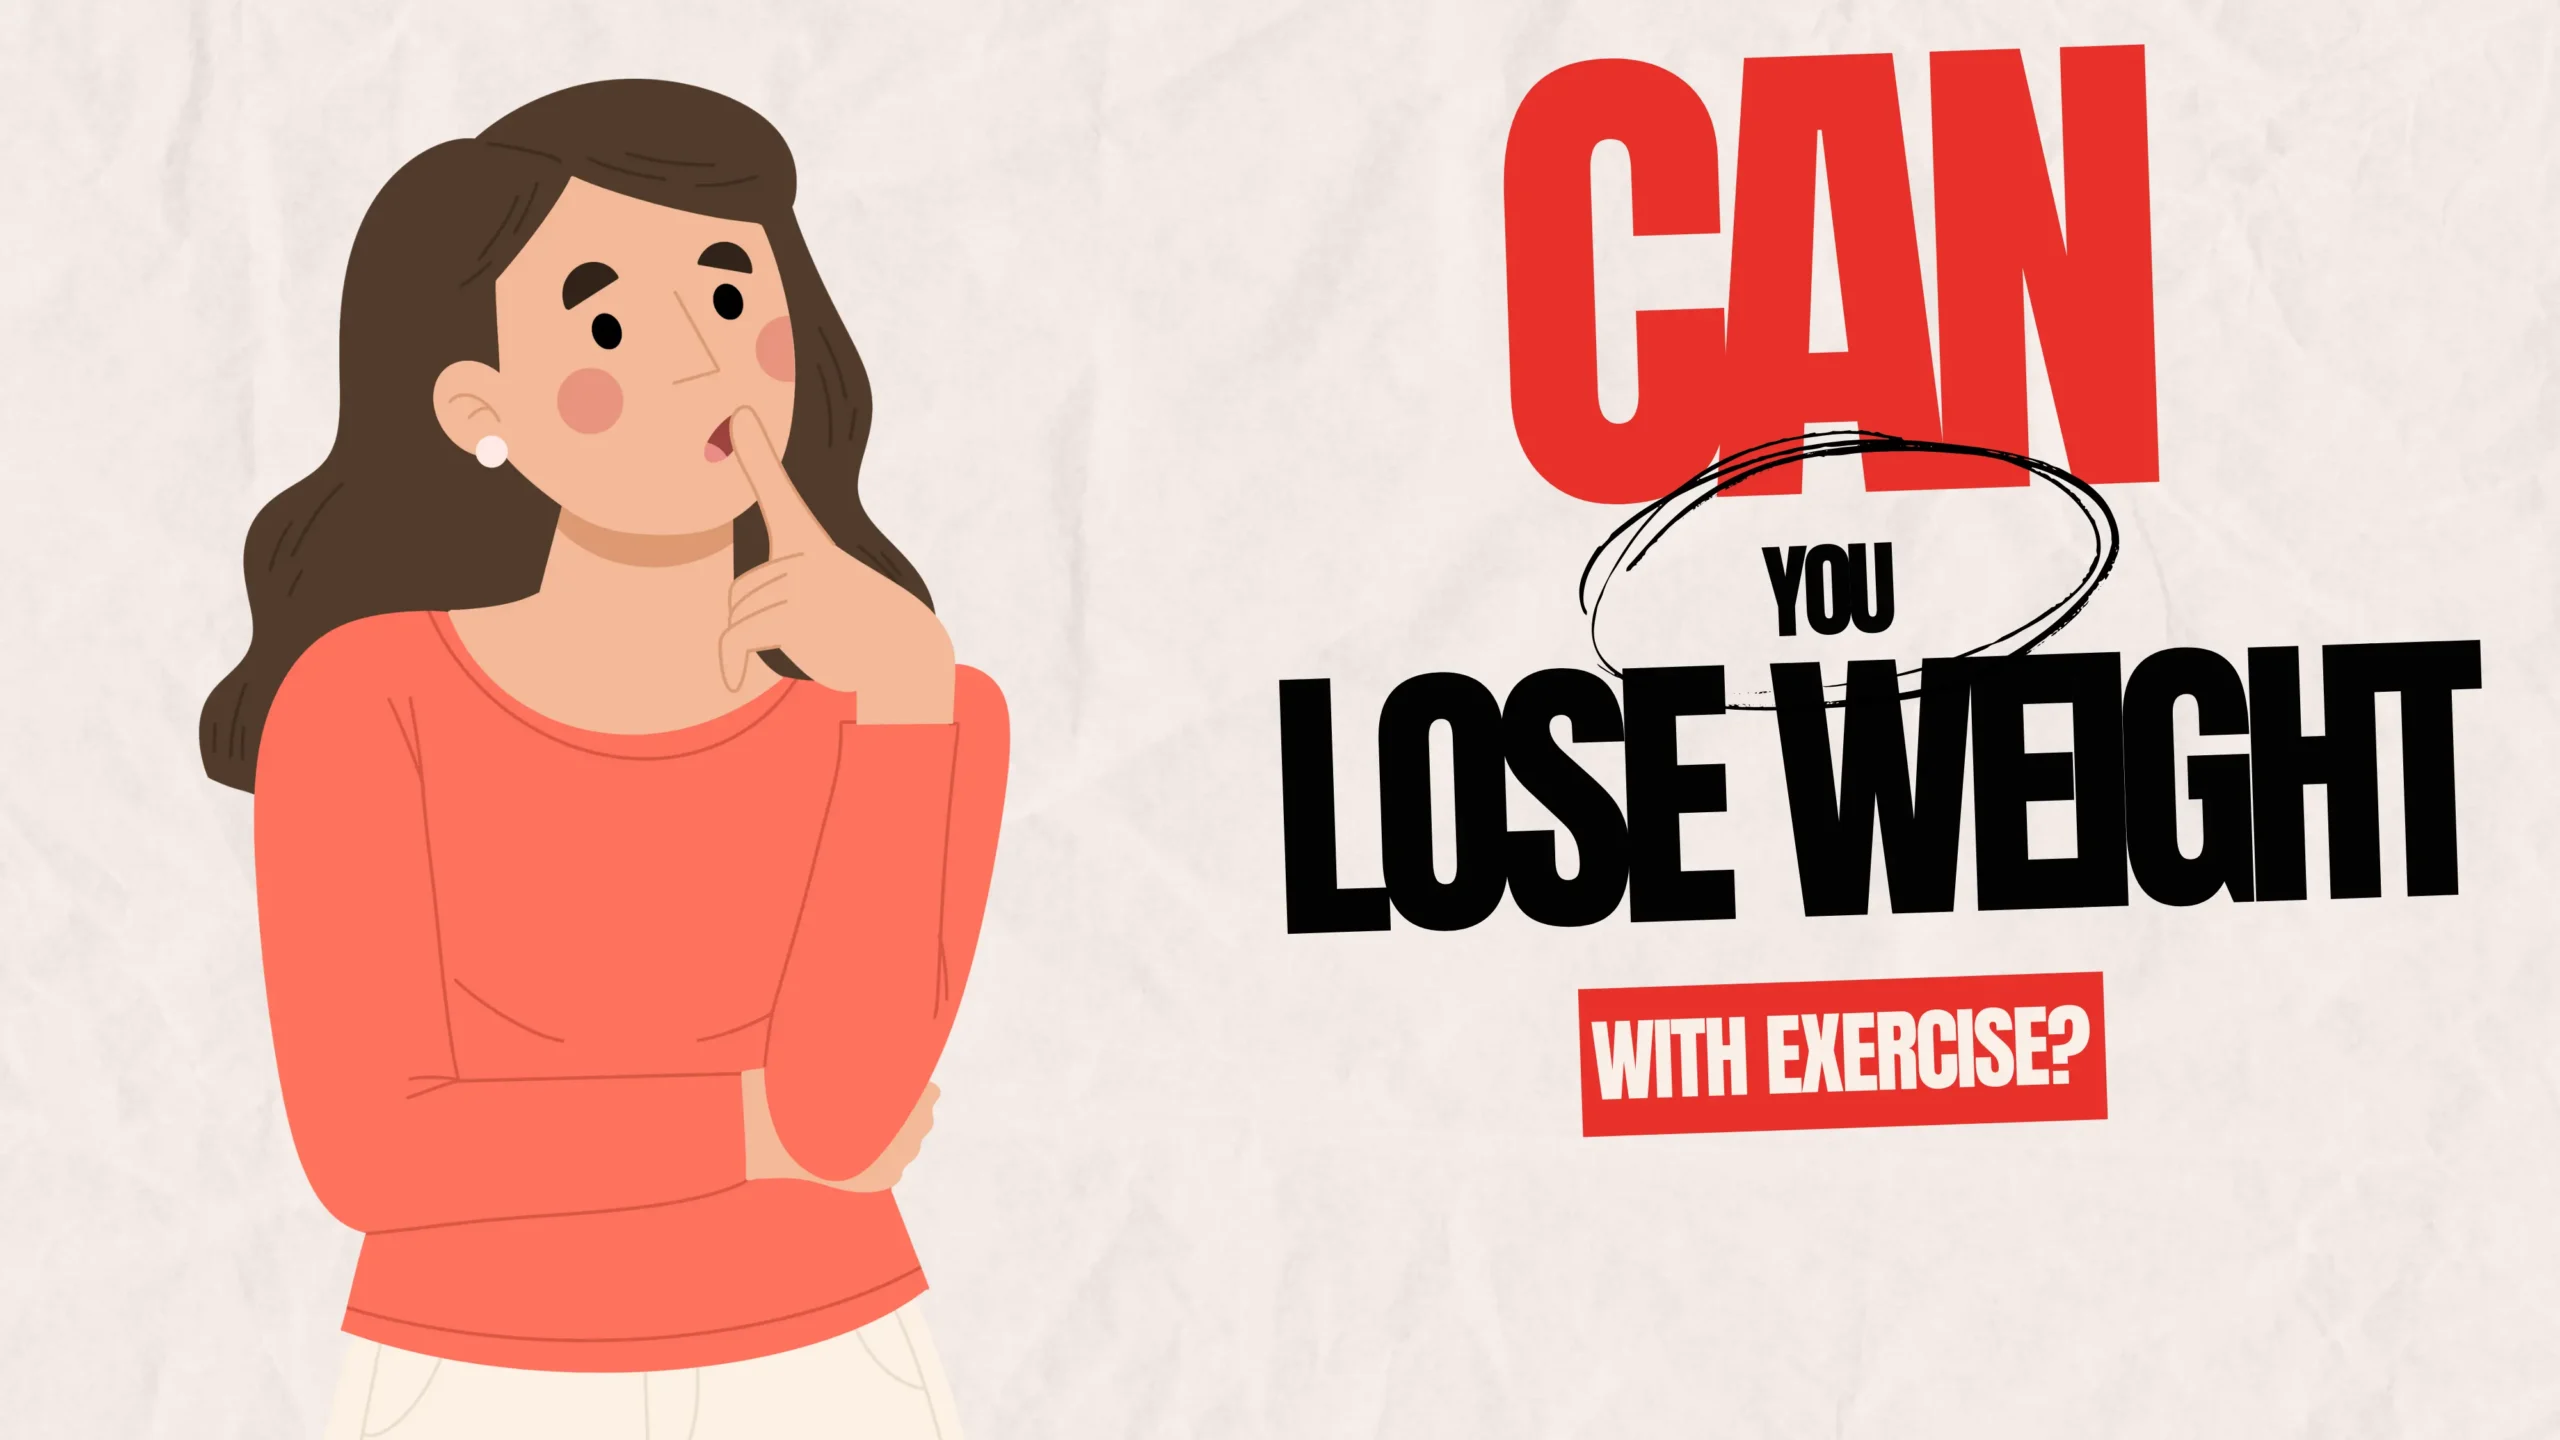 Can You Lose Weight With Exercise